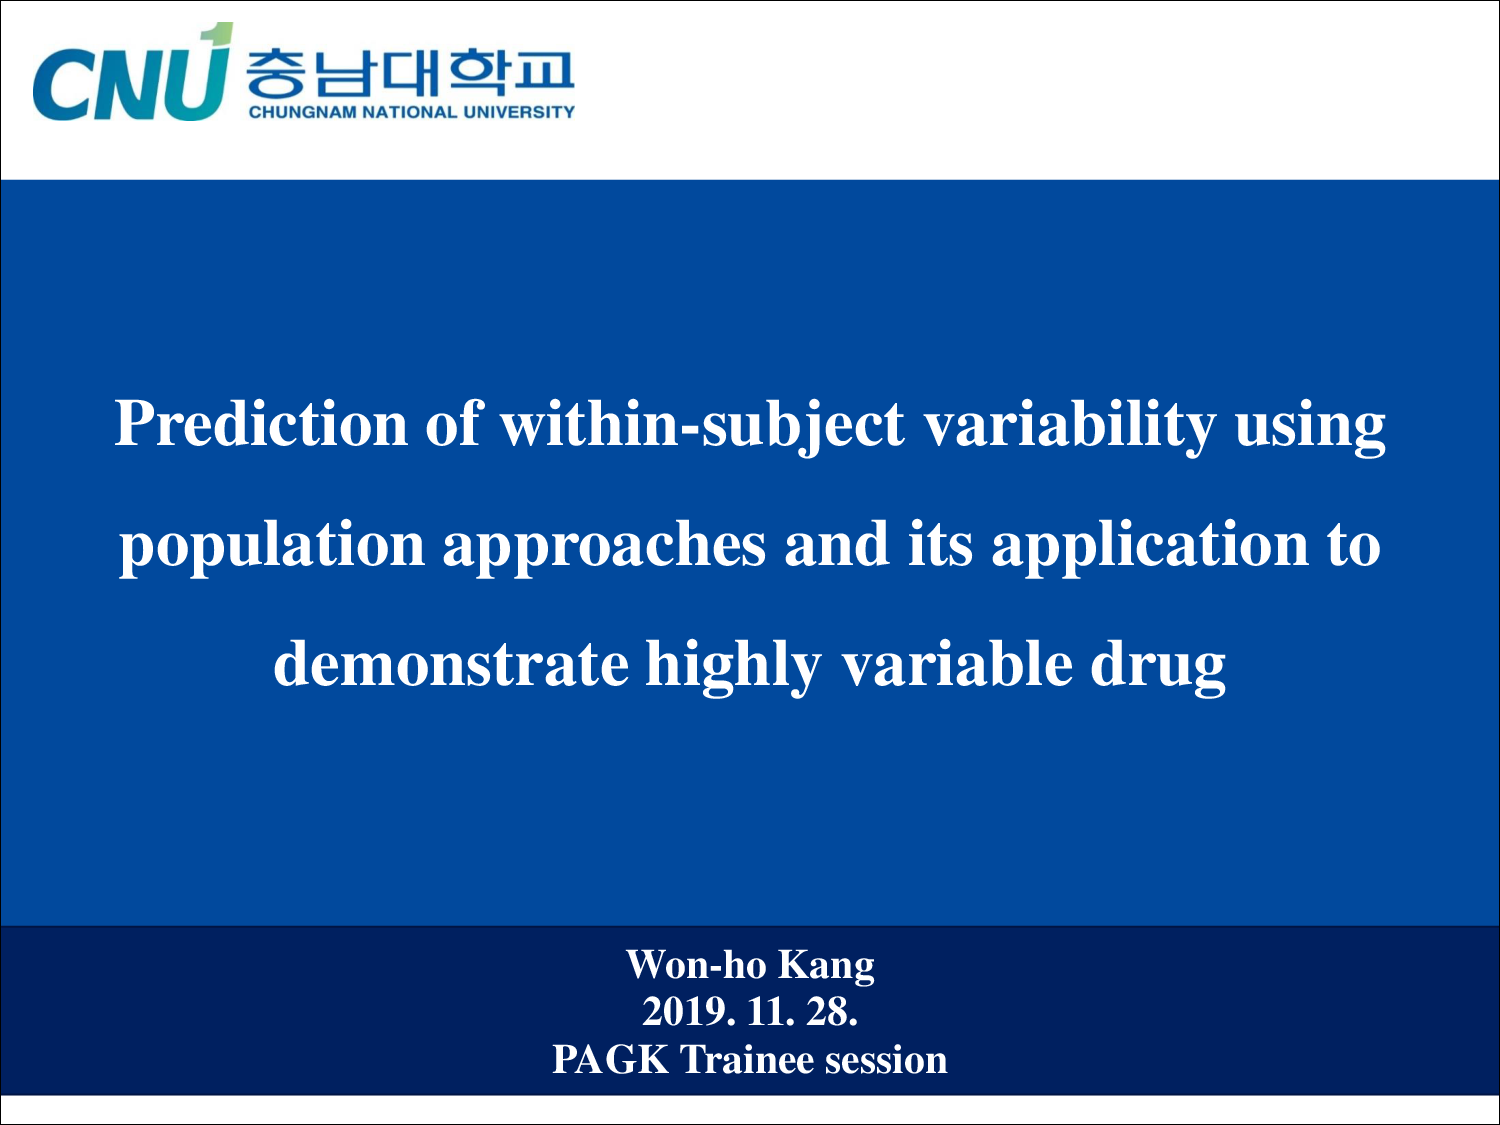 Prediction of within-subject variability using population approaches and its application to demonstrate highly variable drug